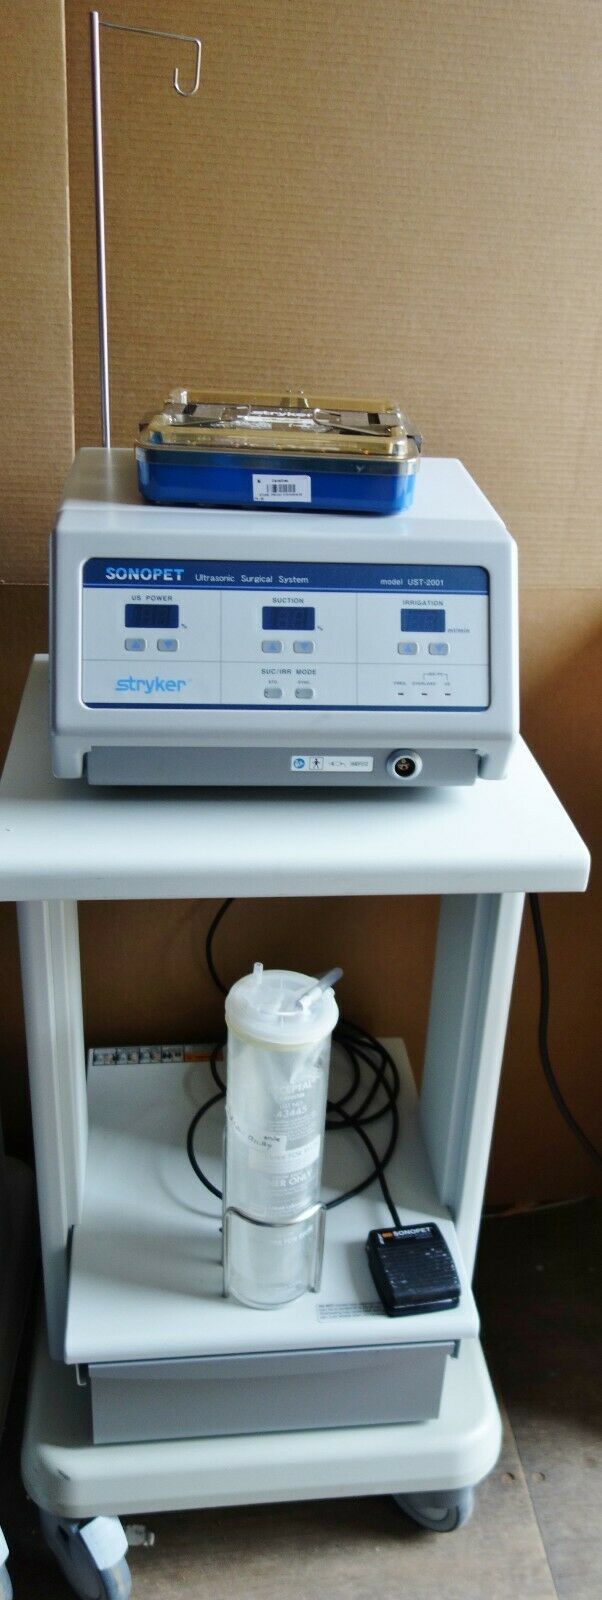 2014 Stryker Sonopet Ultrasonic Surgical System Mo